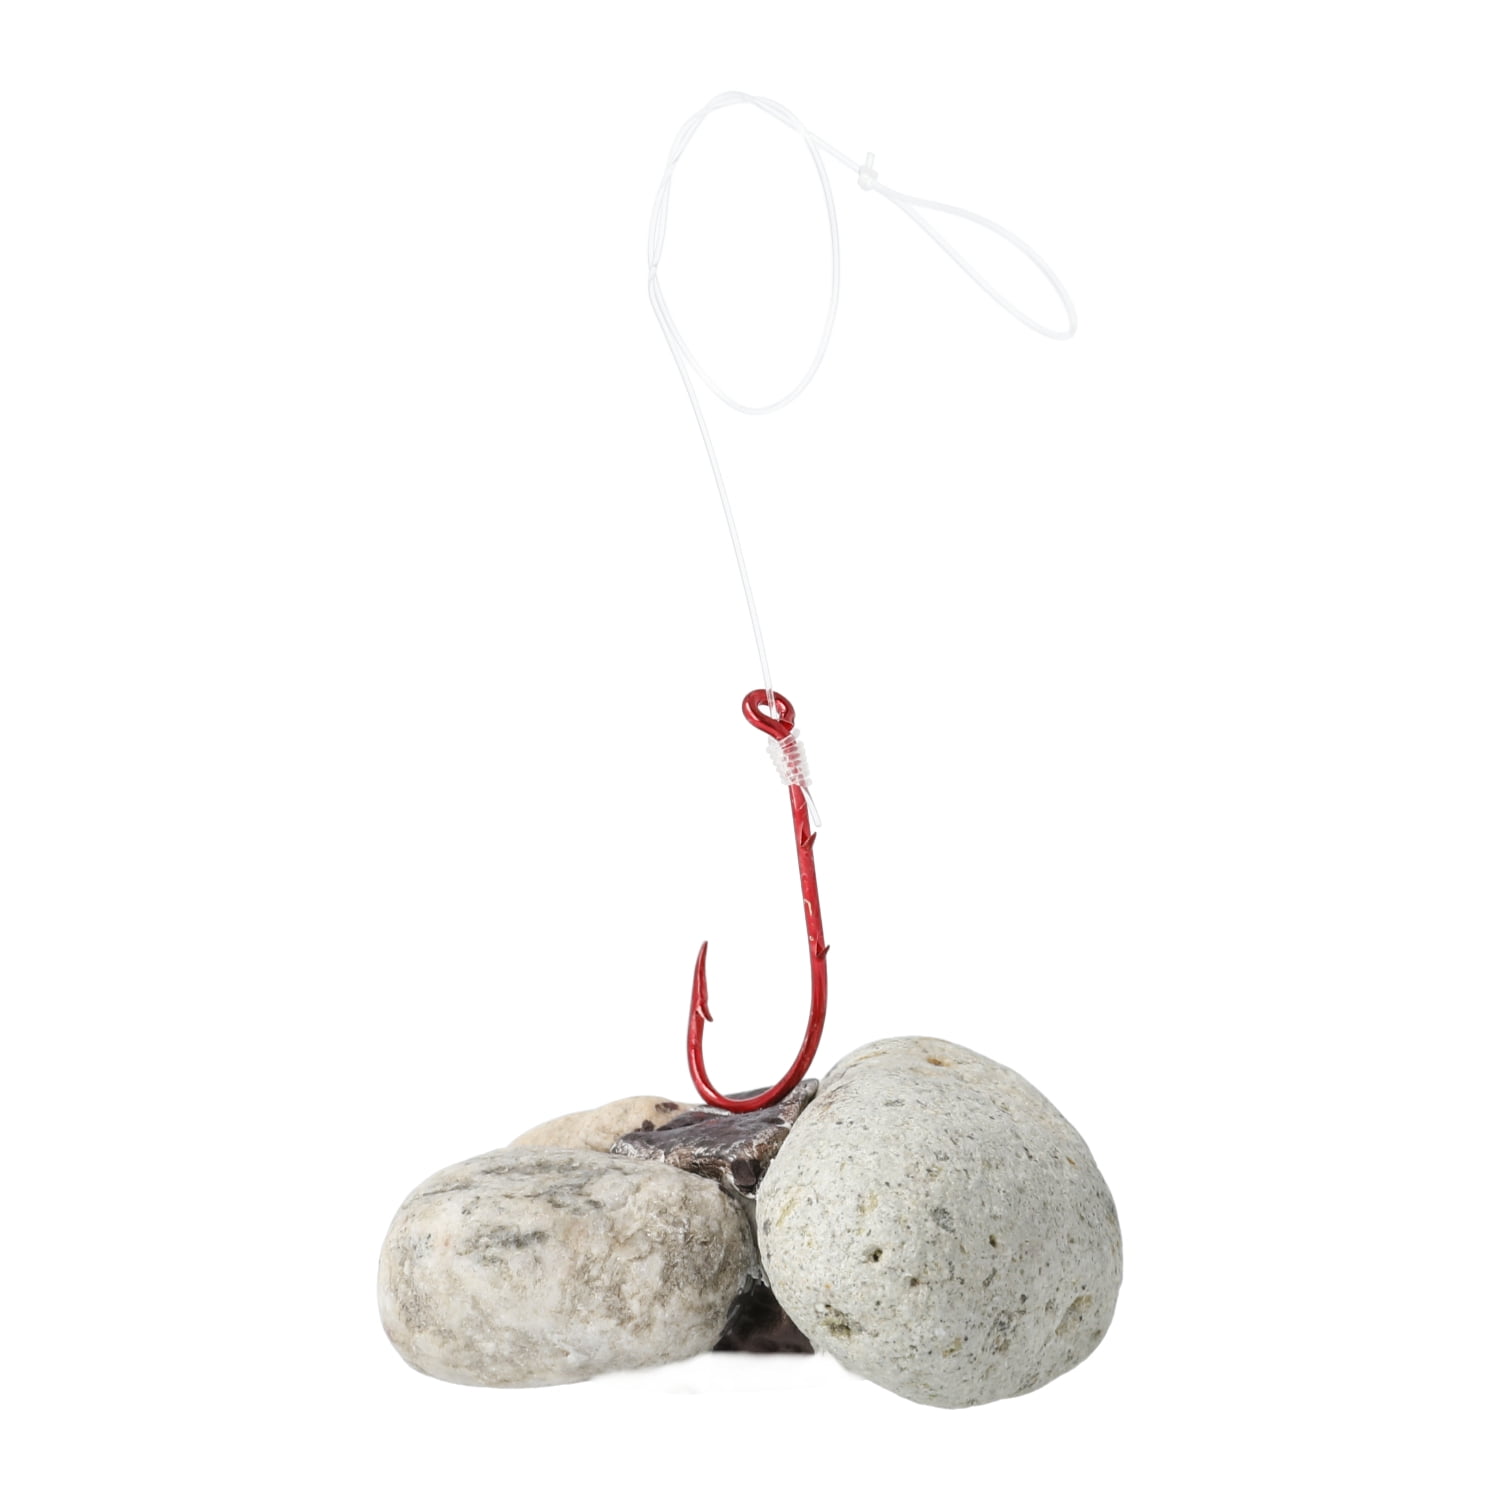 Eagle Claw Saltwater Fishing Hooks - TackleDirect